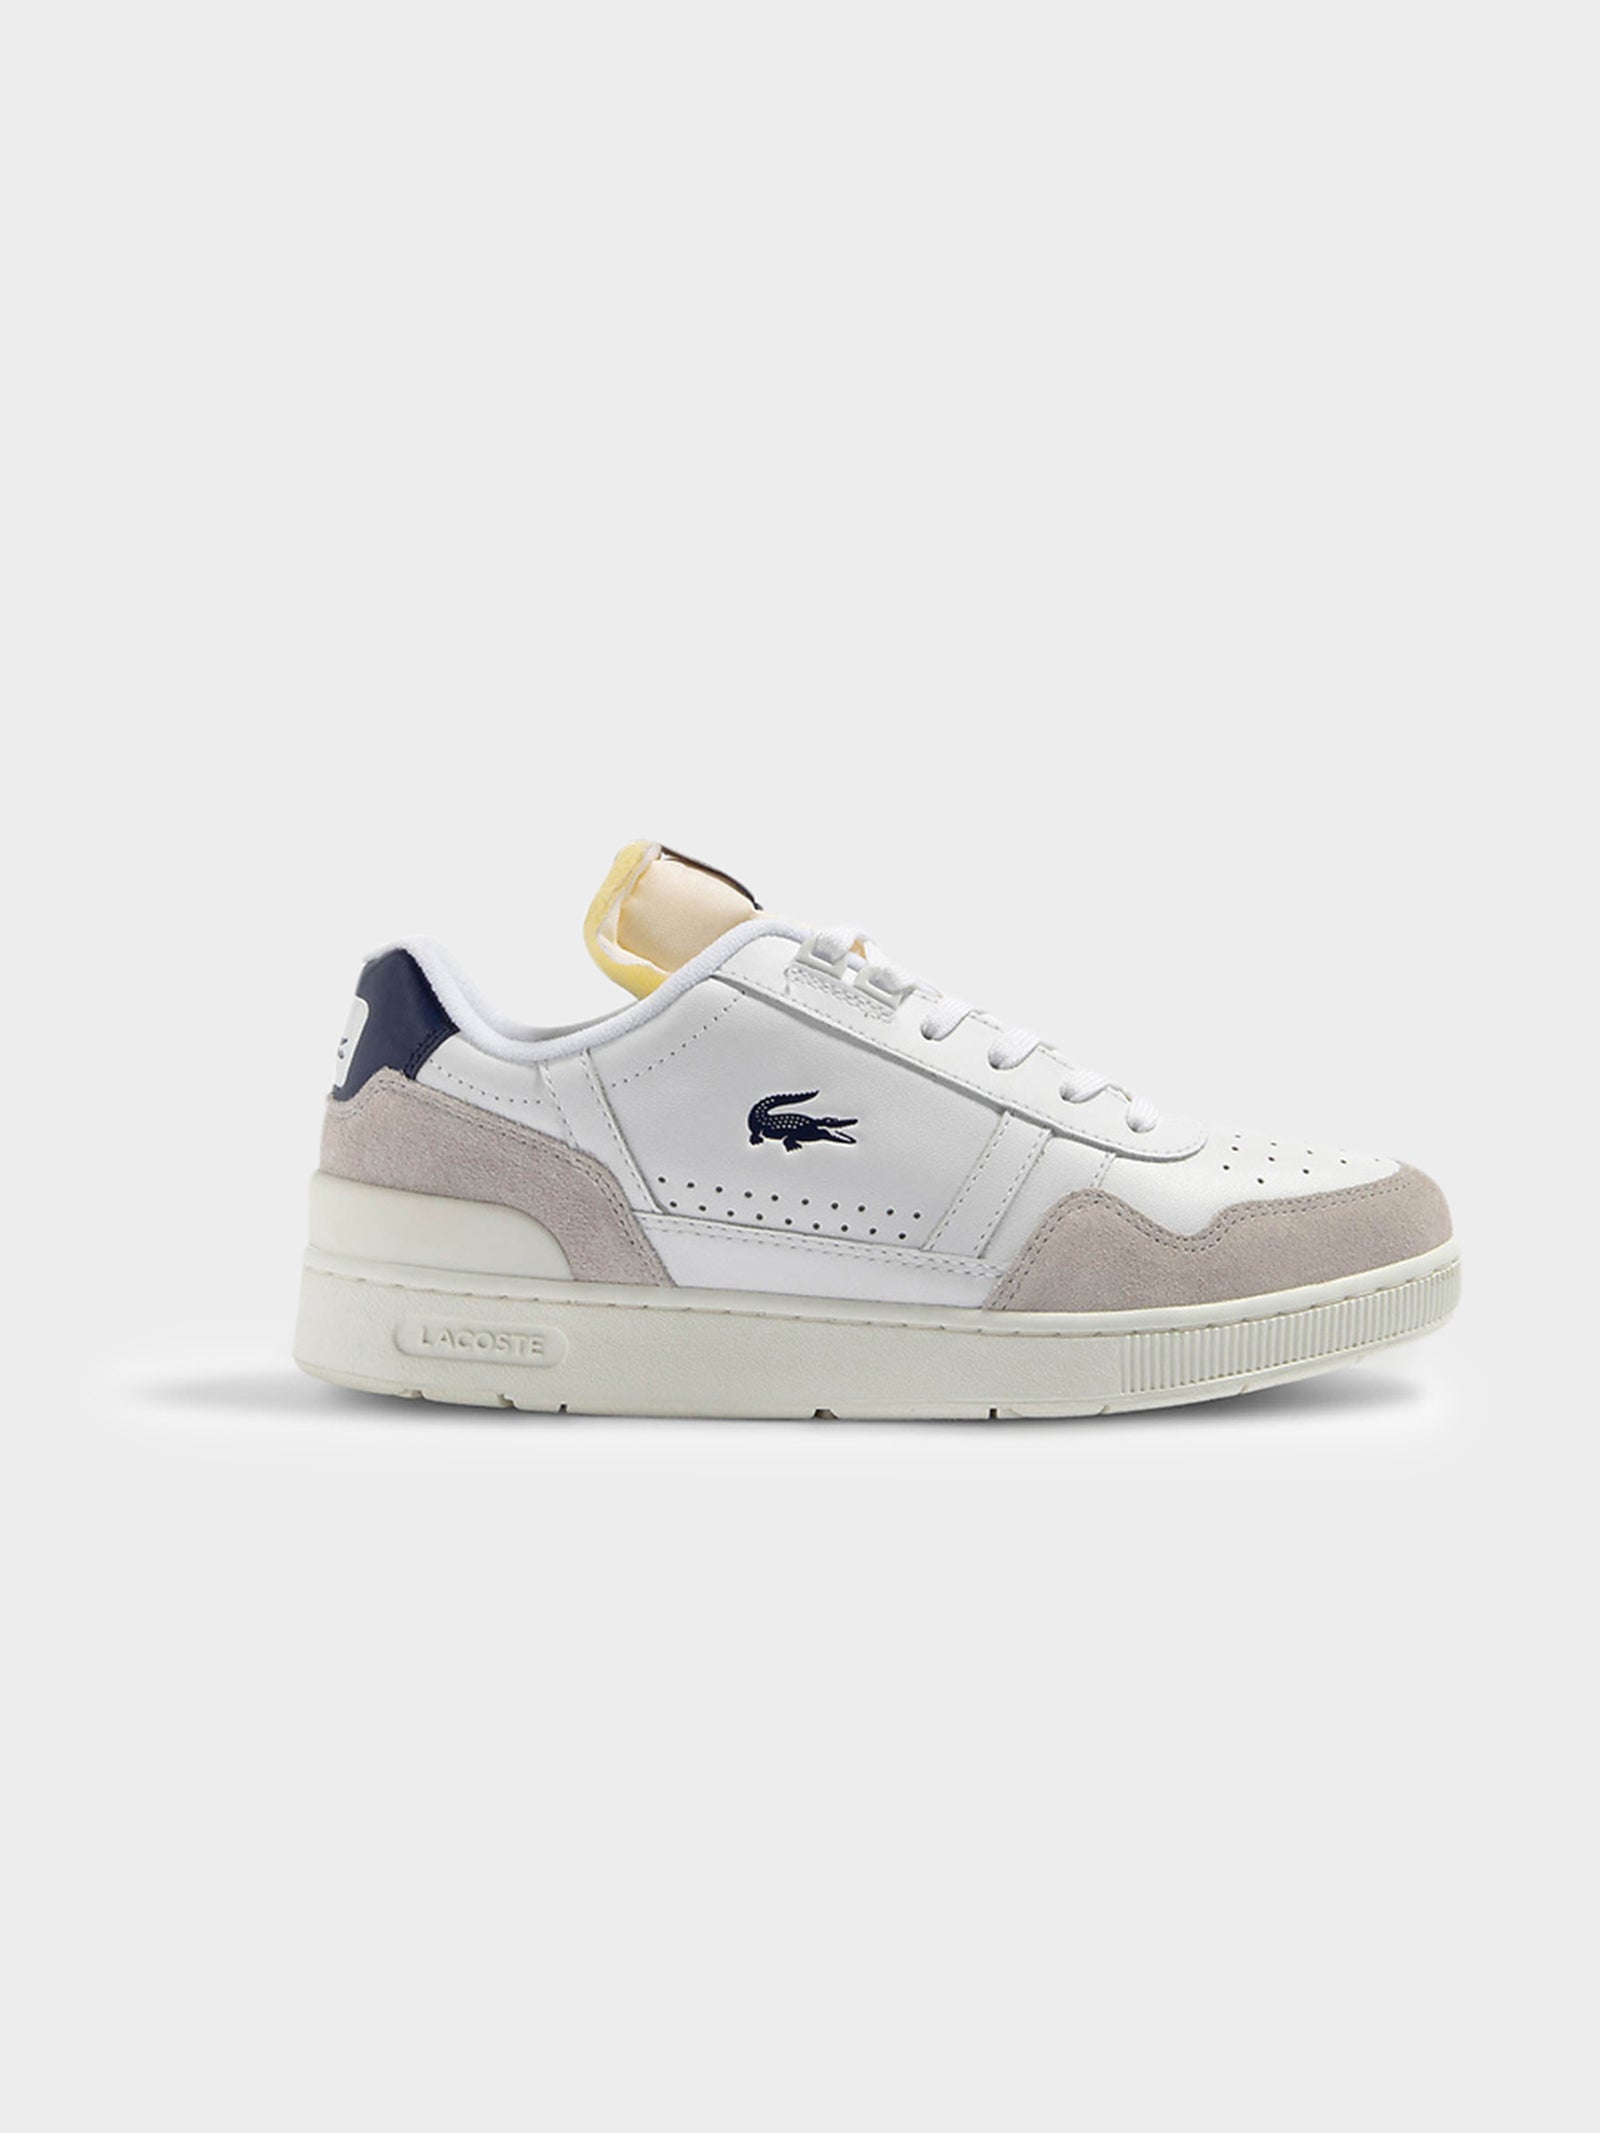 Mens T-Clip Trim Sneakers in White & Navy - Glue Store